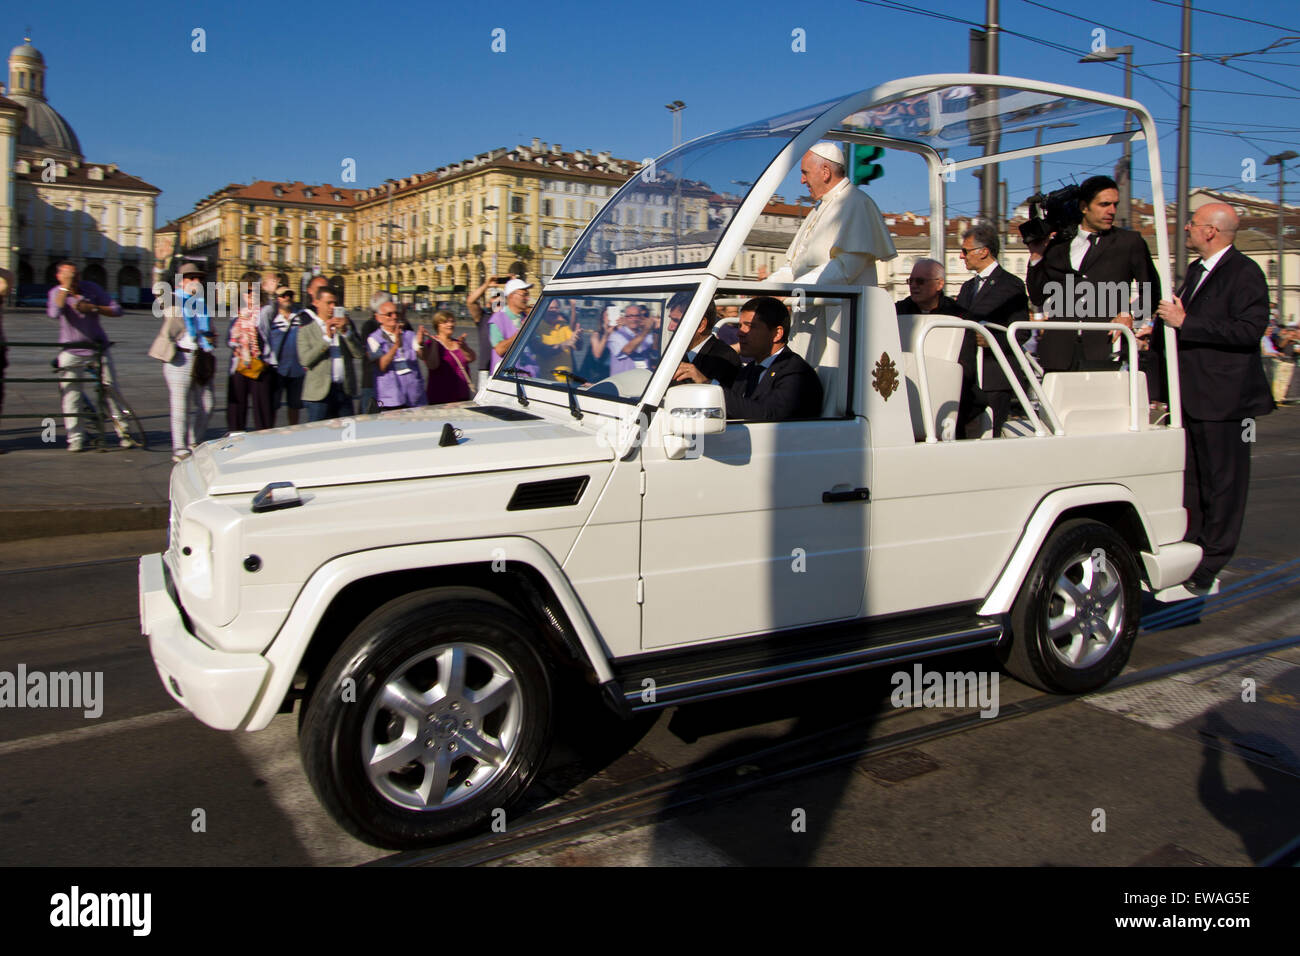 Turin, Italy, 21st June 2015. Pope Francis arrives in Turin on his Popemobile. Stock Photo